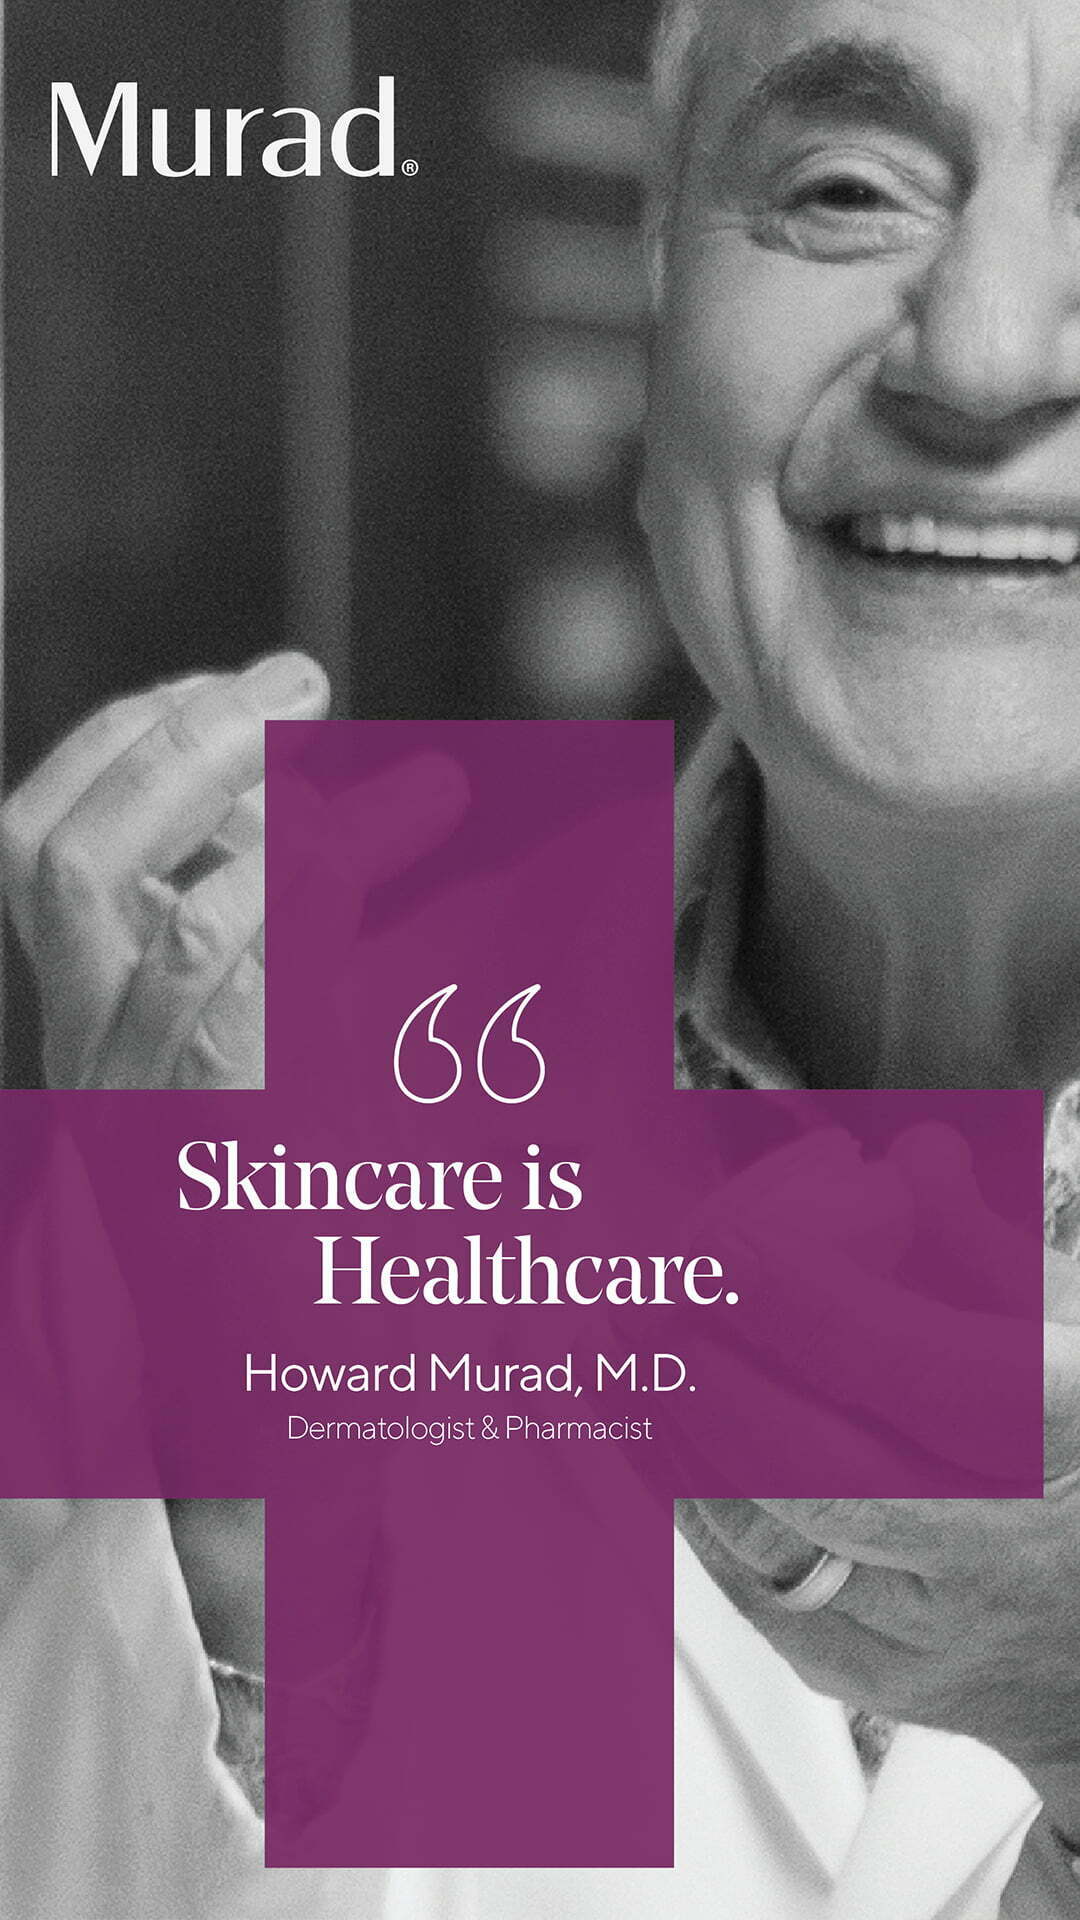 murad facial treatments - dermatologist approved skincare